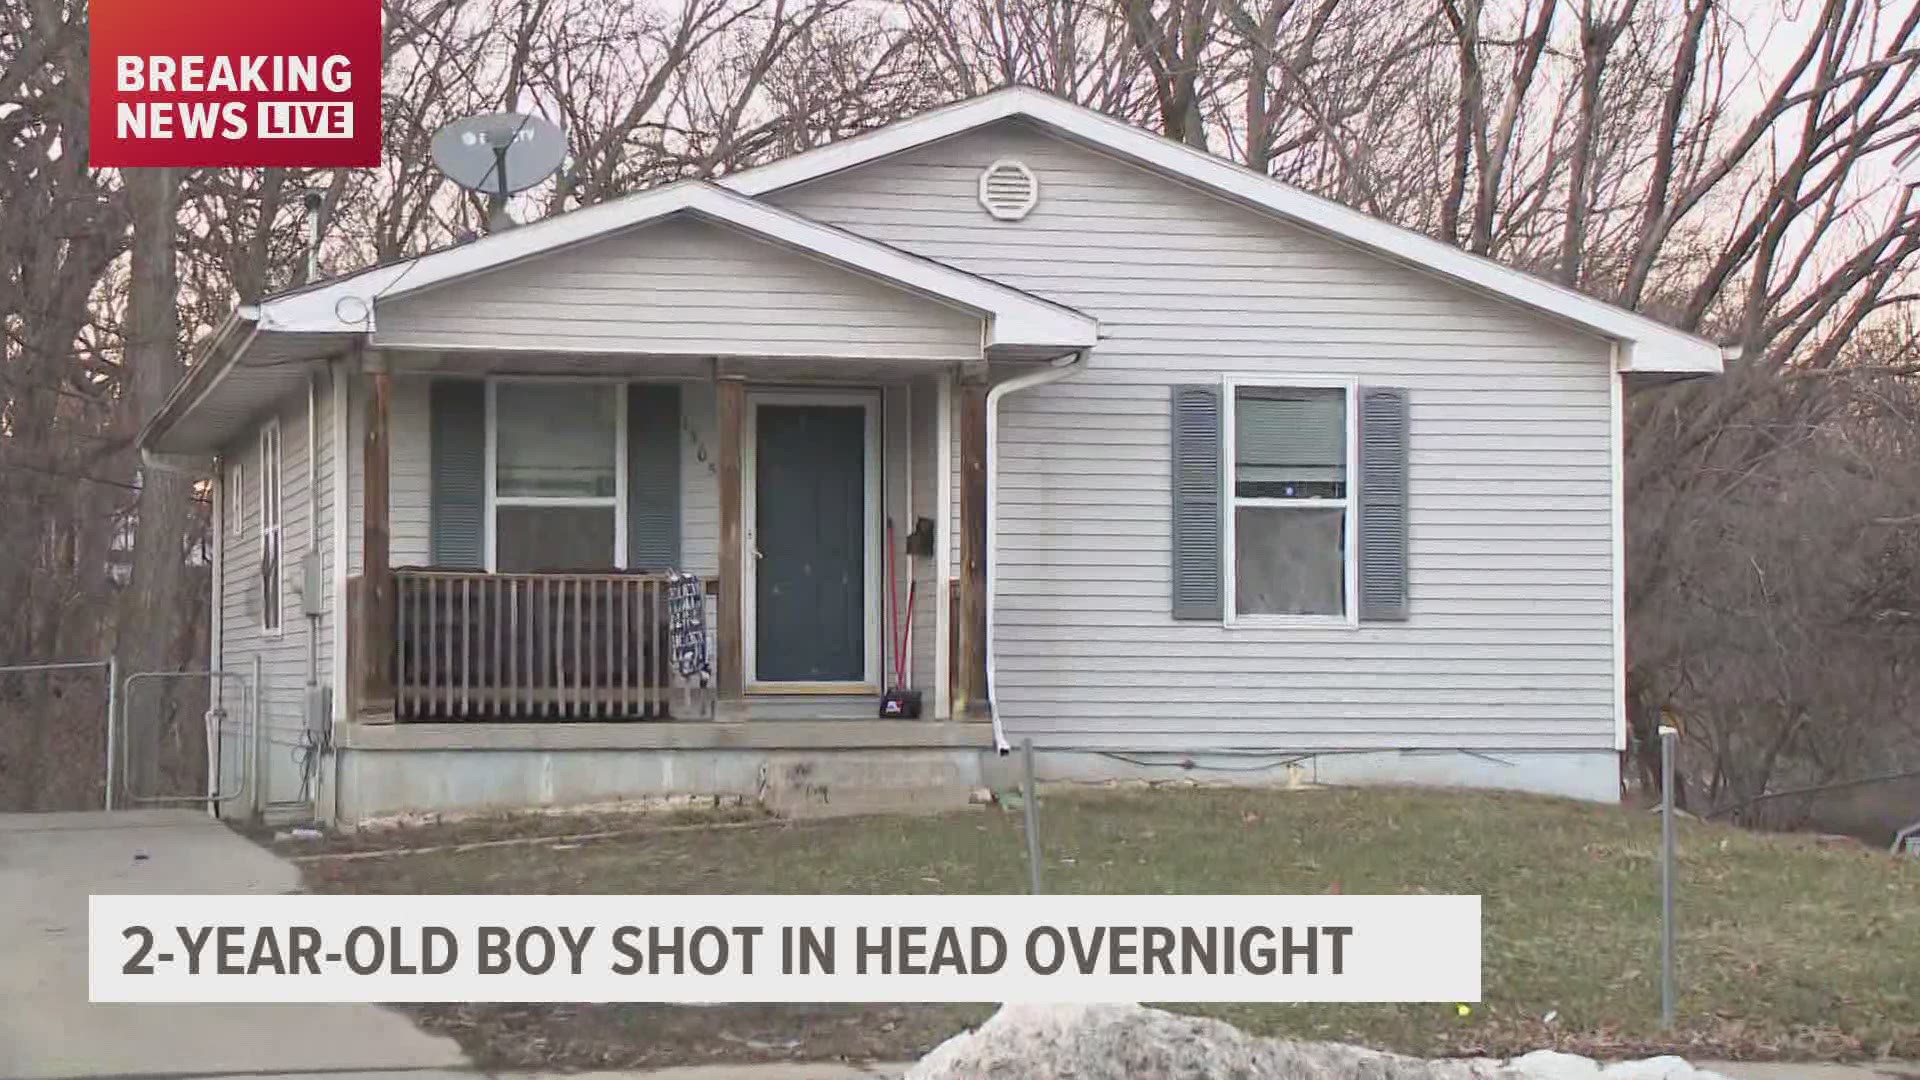 The shooting left a two-year-old boy in critical condition.